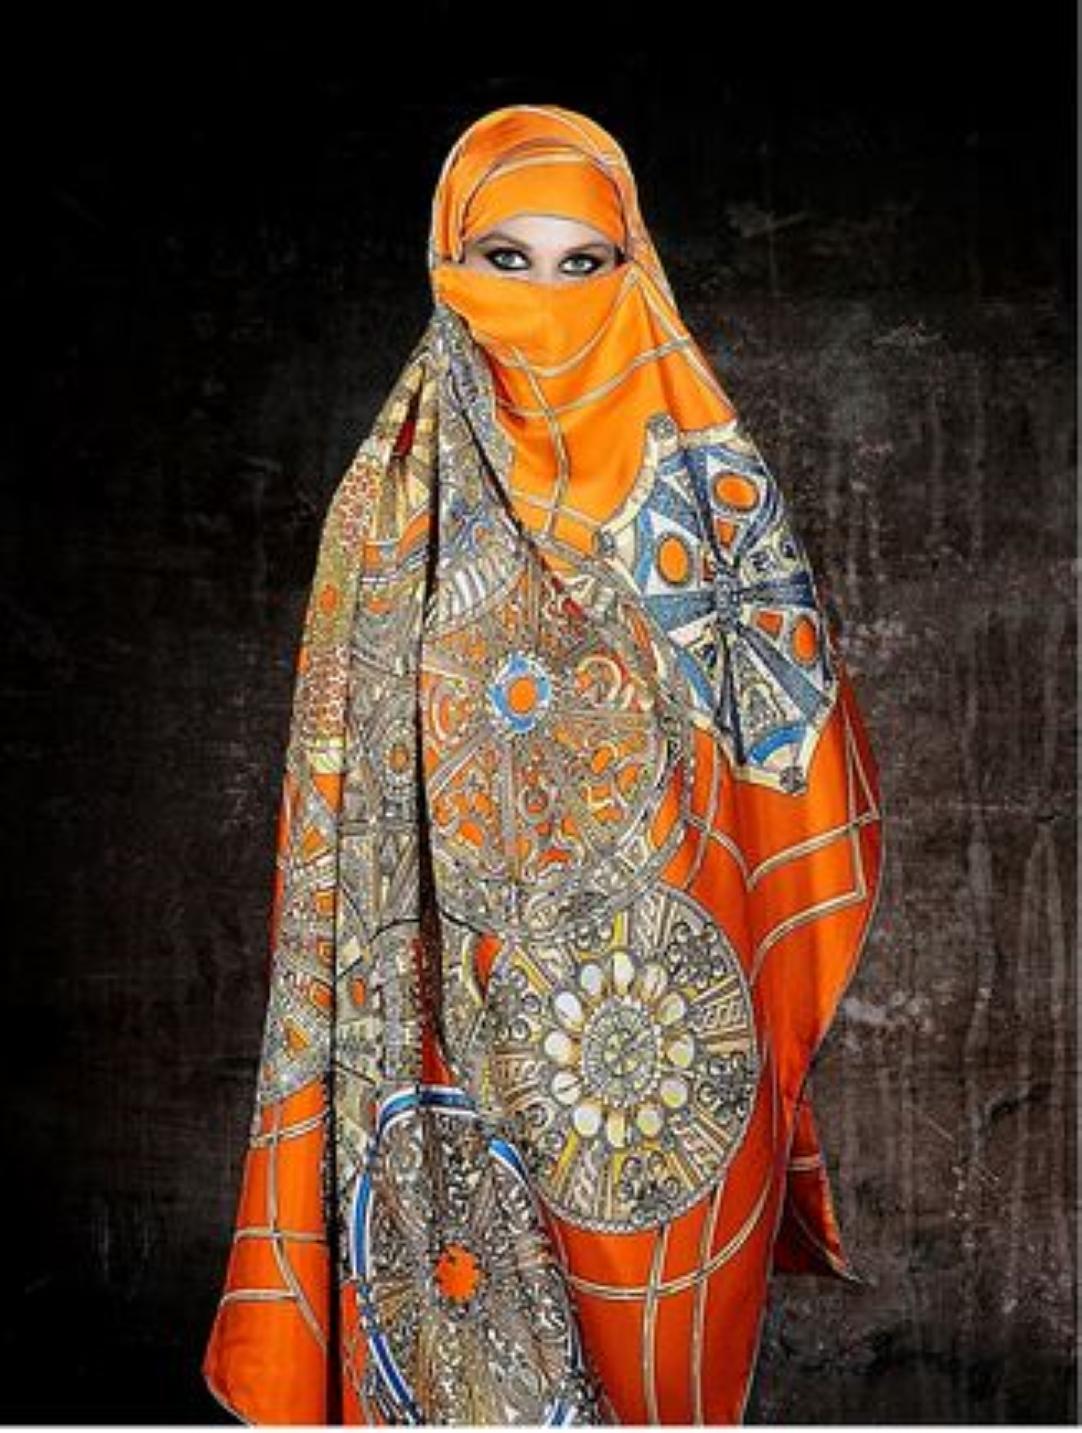 "Burqa Hermes", photography by Cécile Plaisance (28x22in), 2018